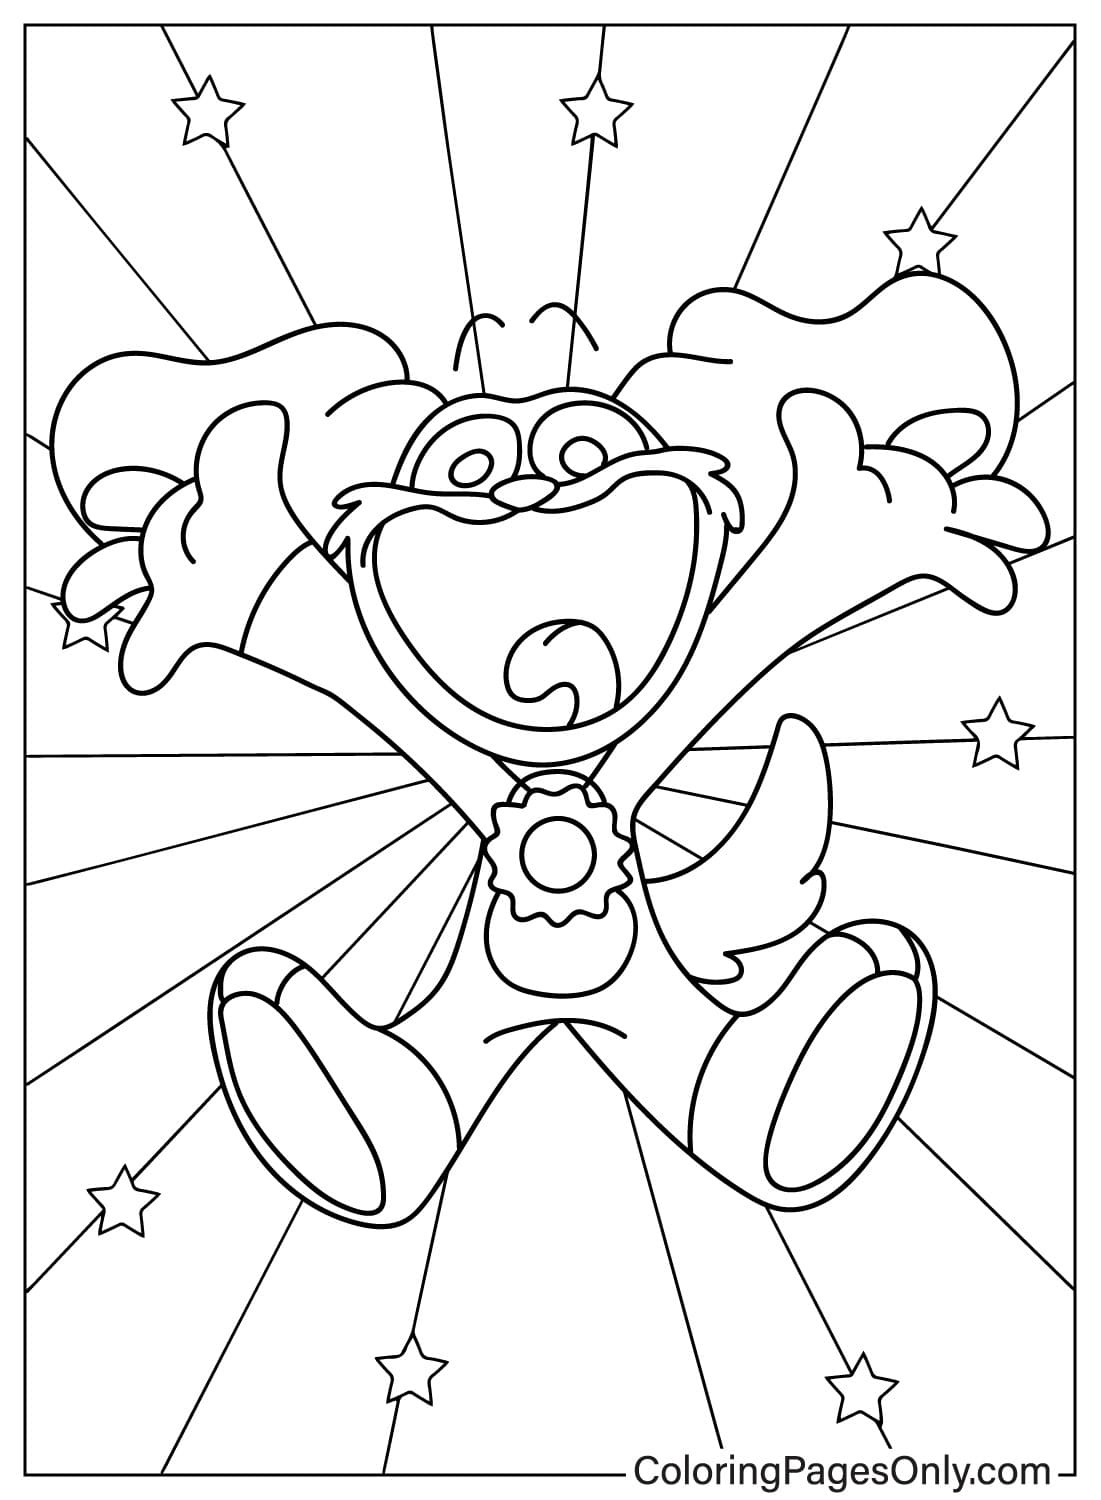 DogDay Coloring Page Free - Free ...